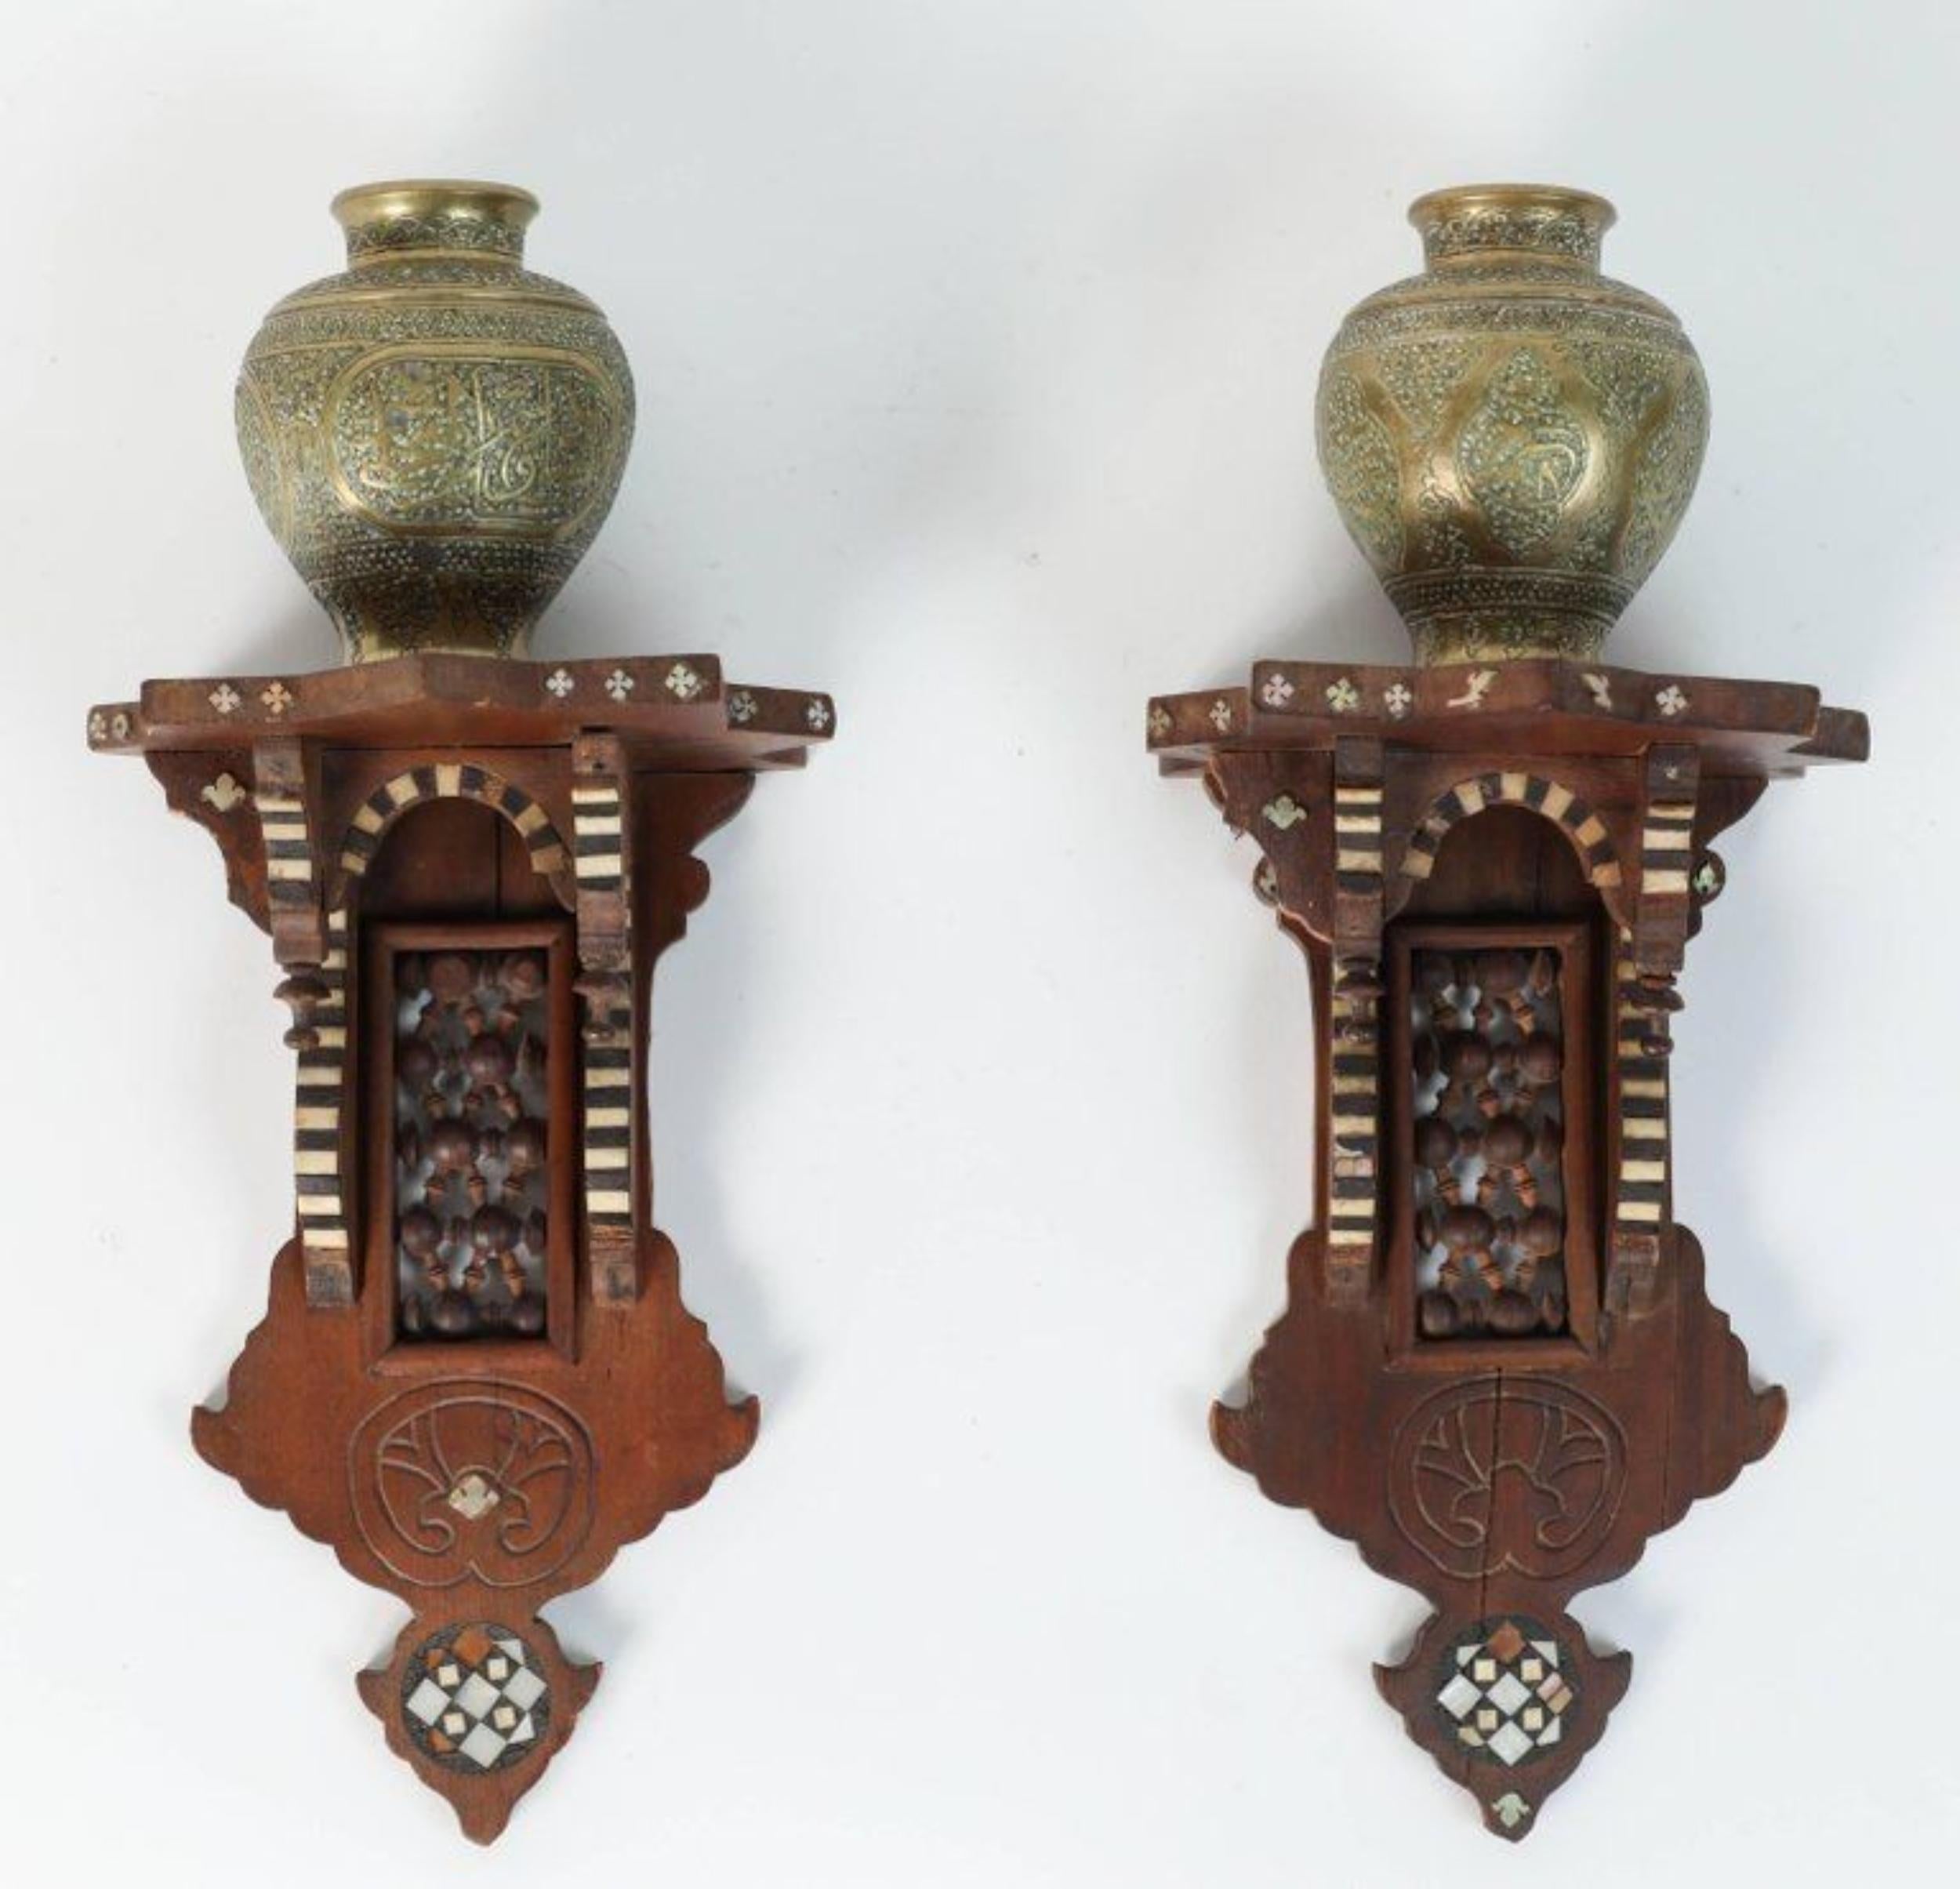 Beautiful pair of Persian engraved Ghalam-zani brass vases on Middle Eastern wooden wall decorative brackets.


The small brass vases are finely hand-chased with elaborate designs and presented on hand crafted wooden brackets inlaid with mother